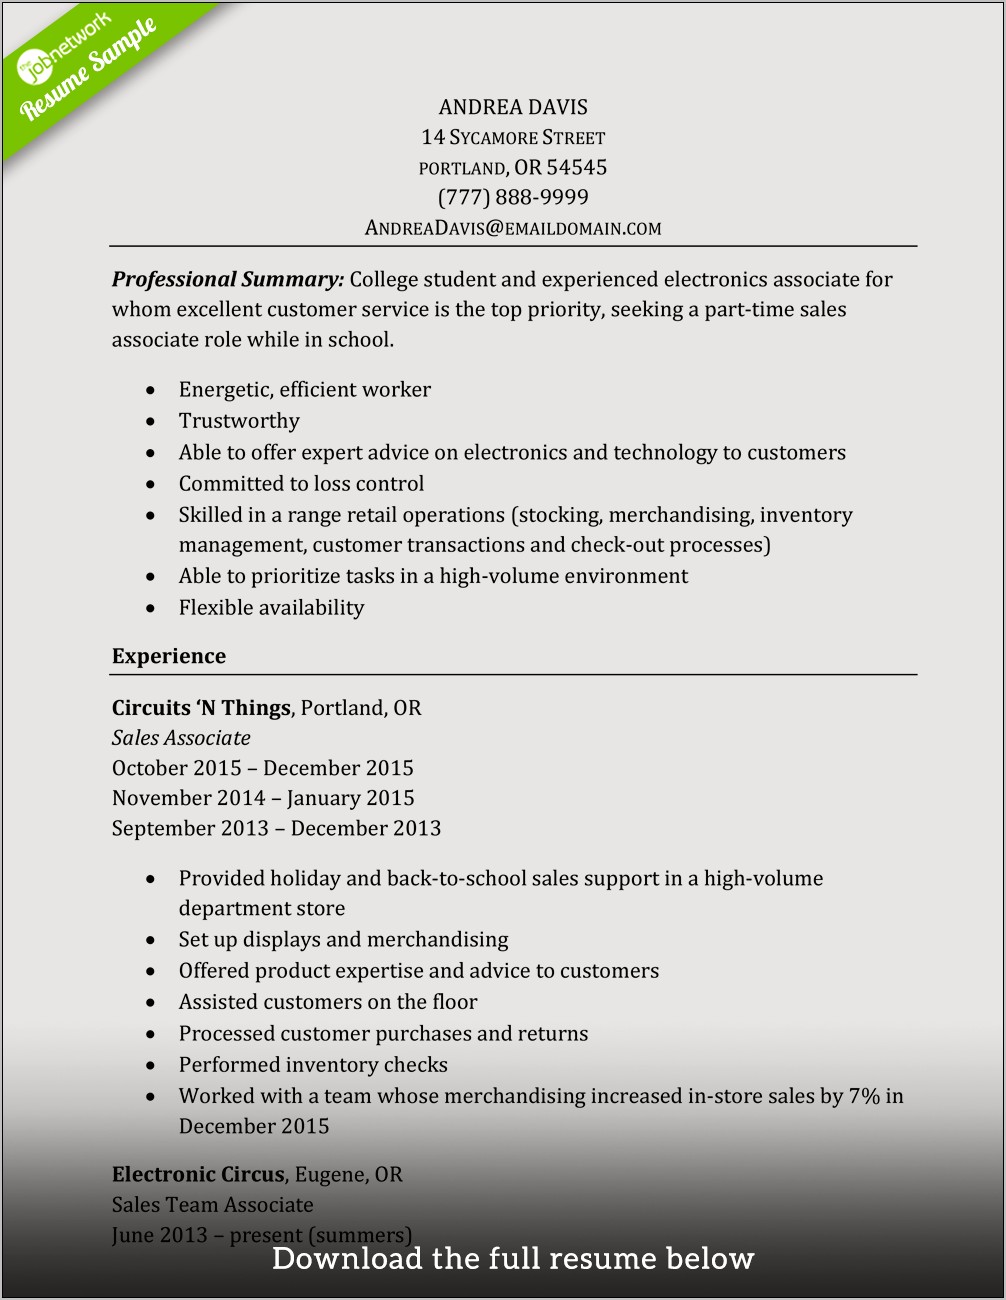 Sales Associate Cutomer Service Experience Example On Resume